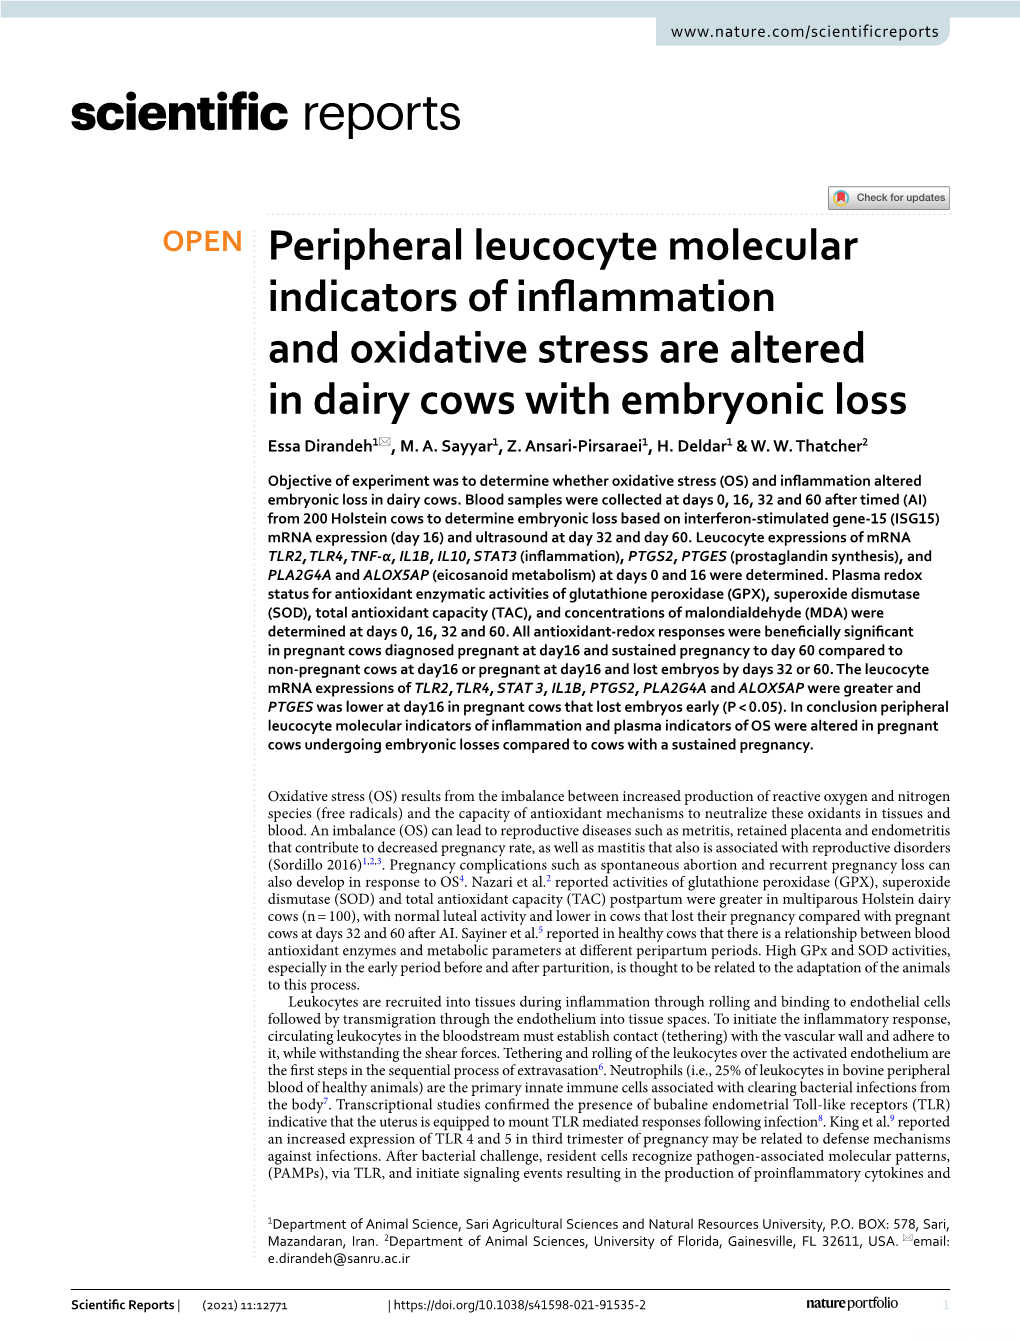 Peripheral Leucocyte Molecular Indicators of Inflammation And